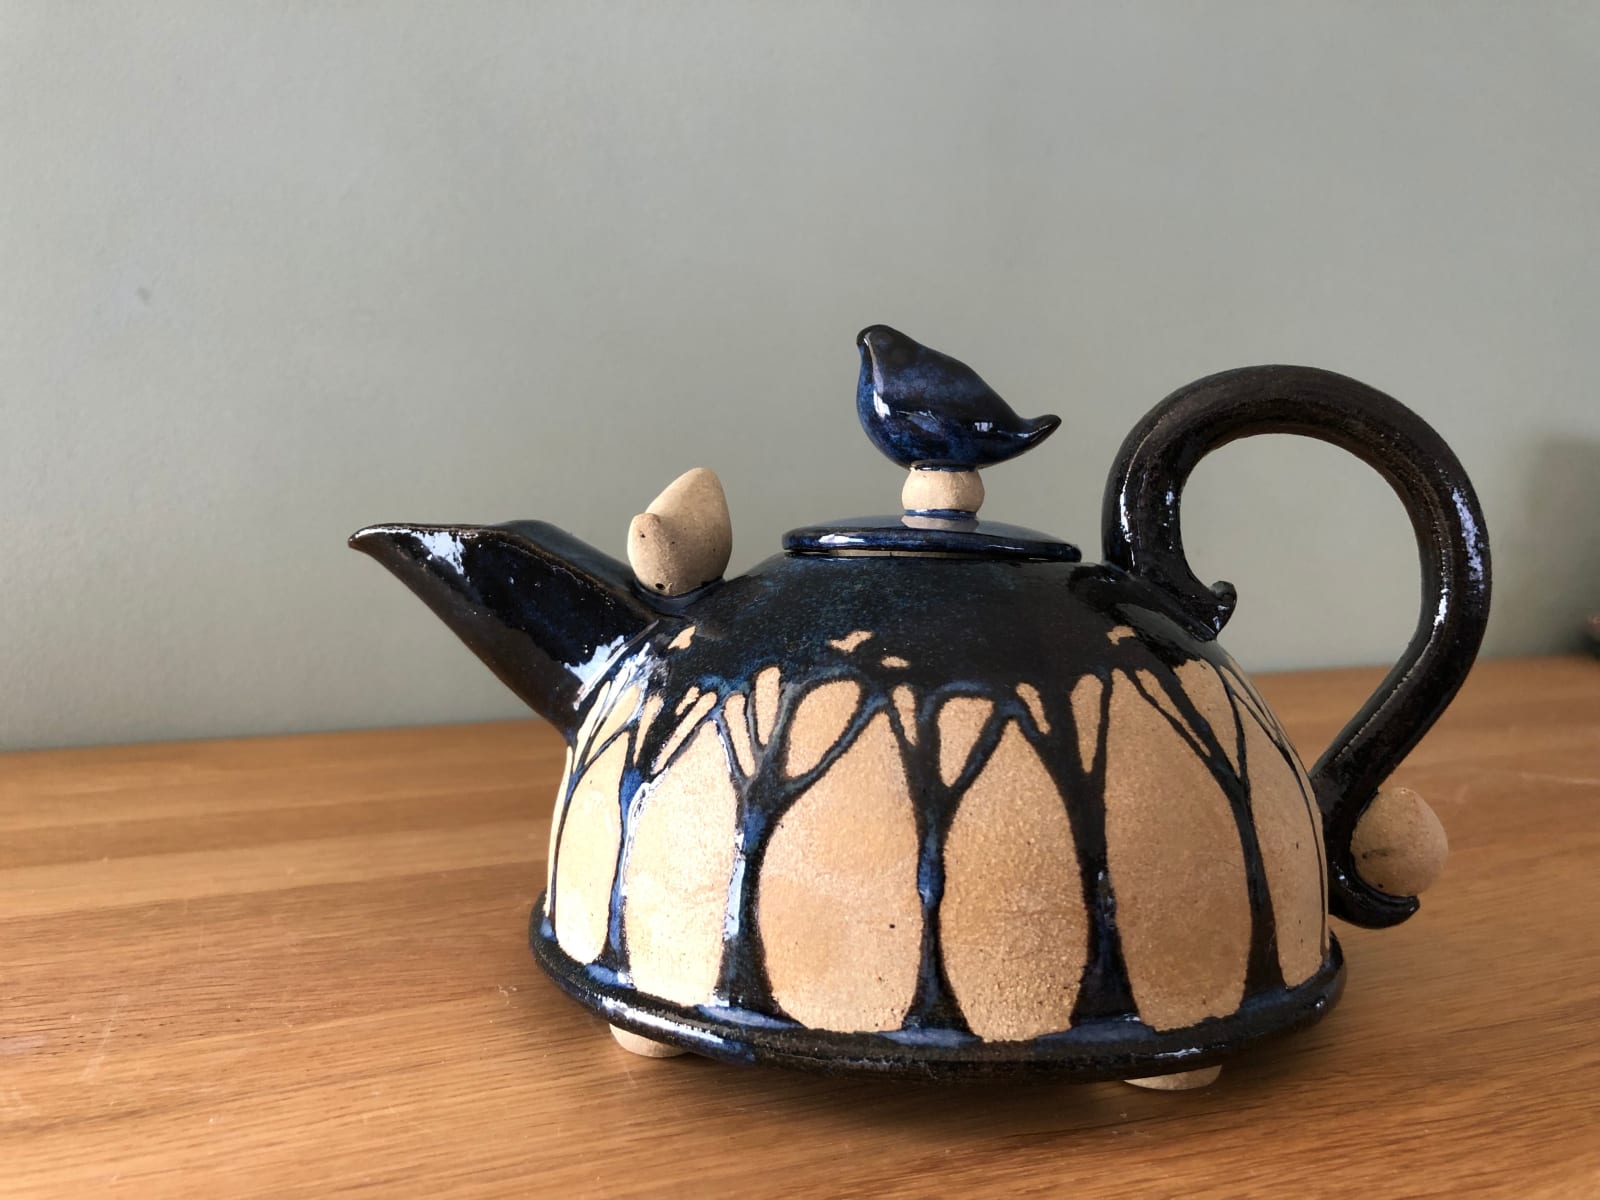 Lois Carson, Teapot with blue roosters